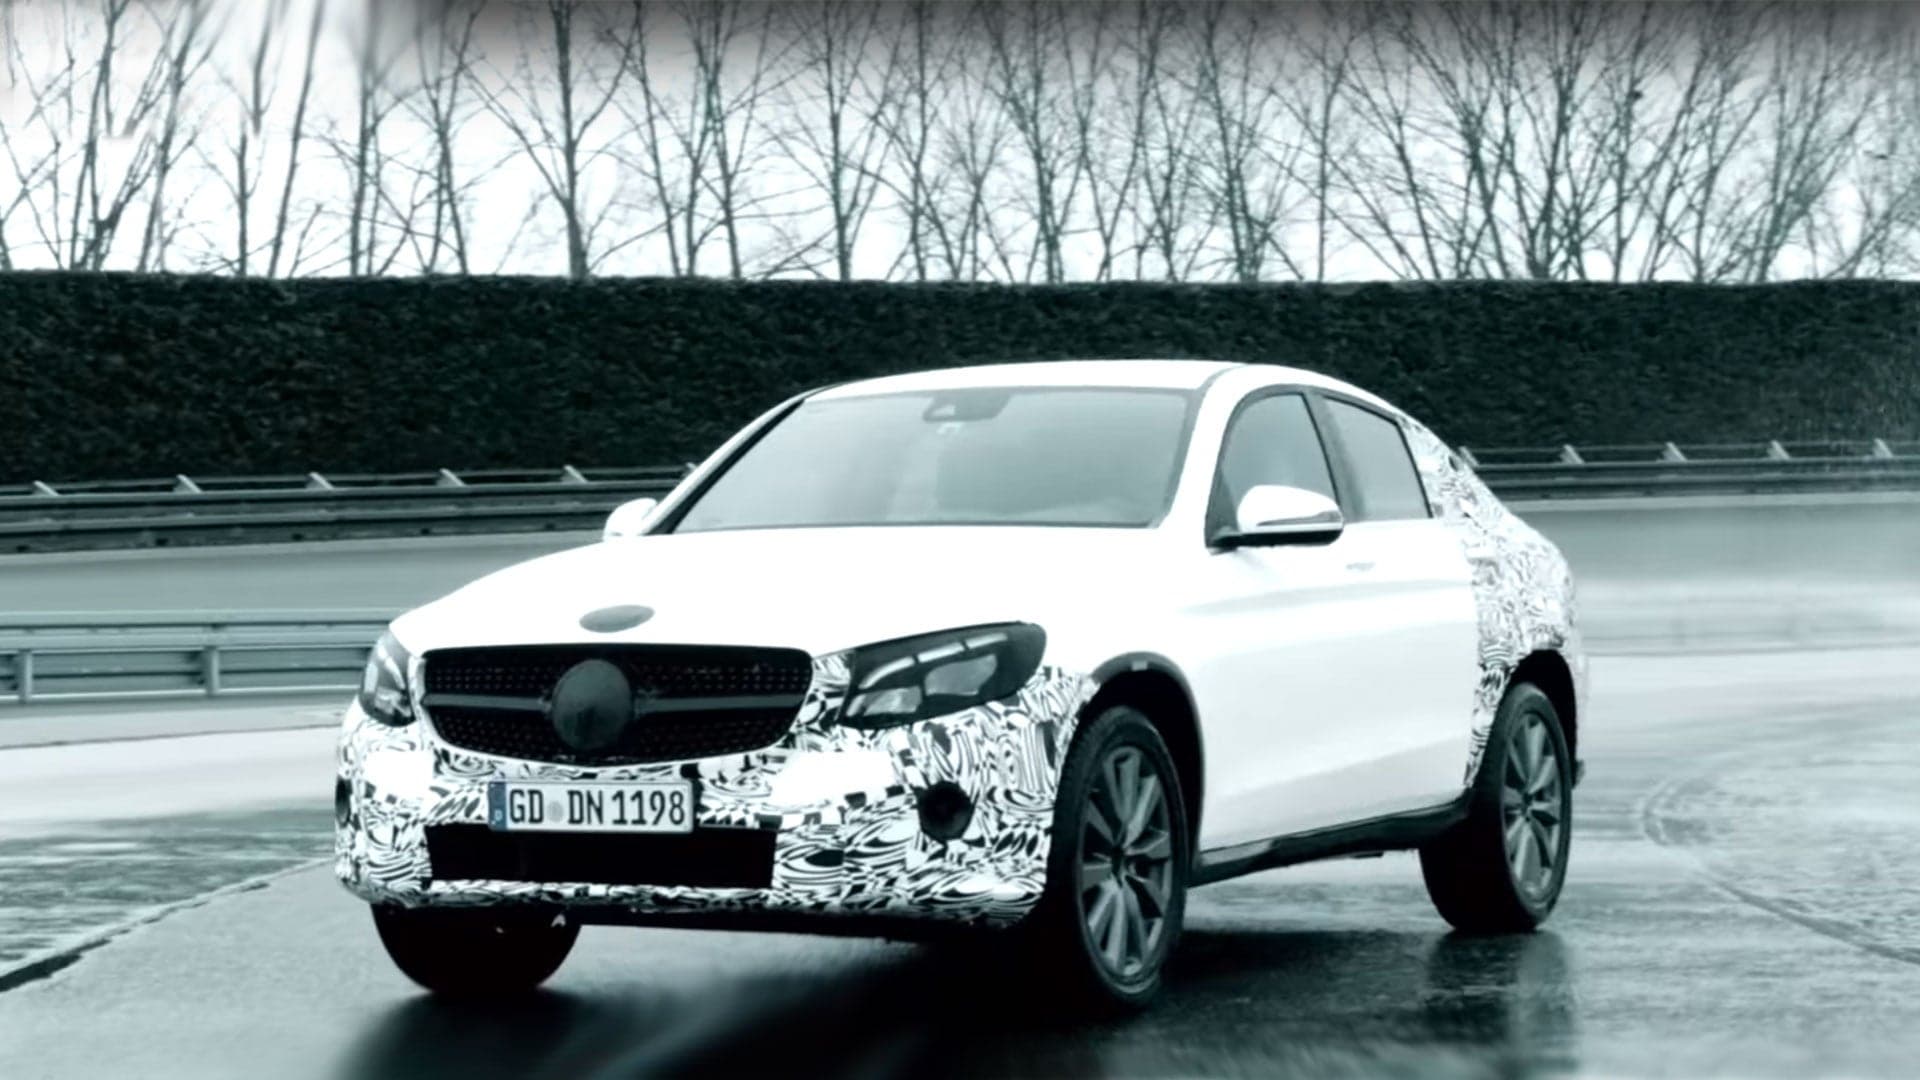 Mercedes-Benz GLC Coupe Shakes Its Butt Ahead of NY Auto Show